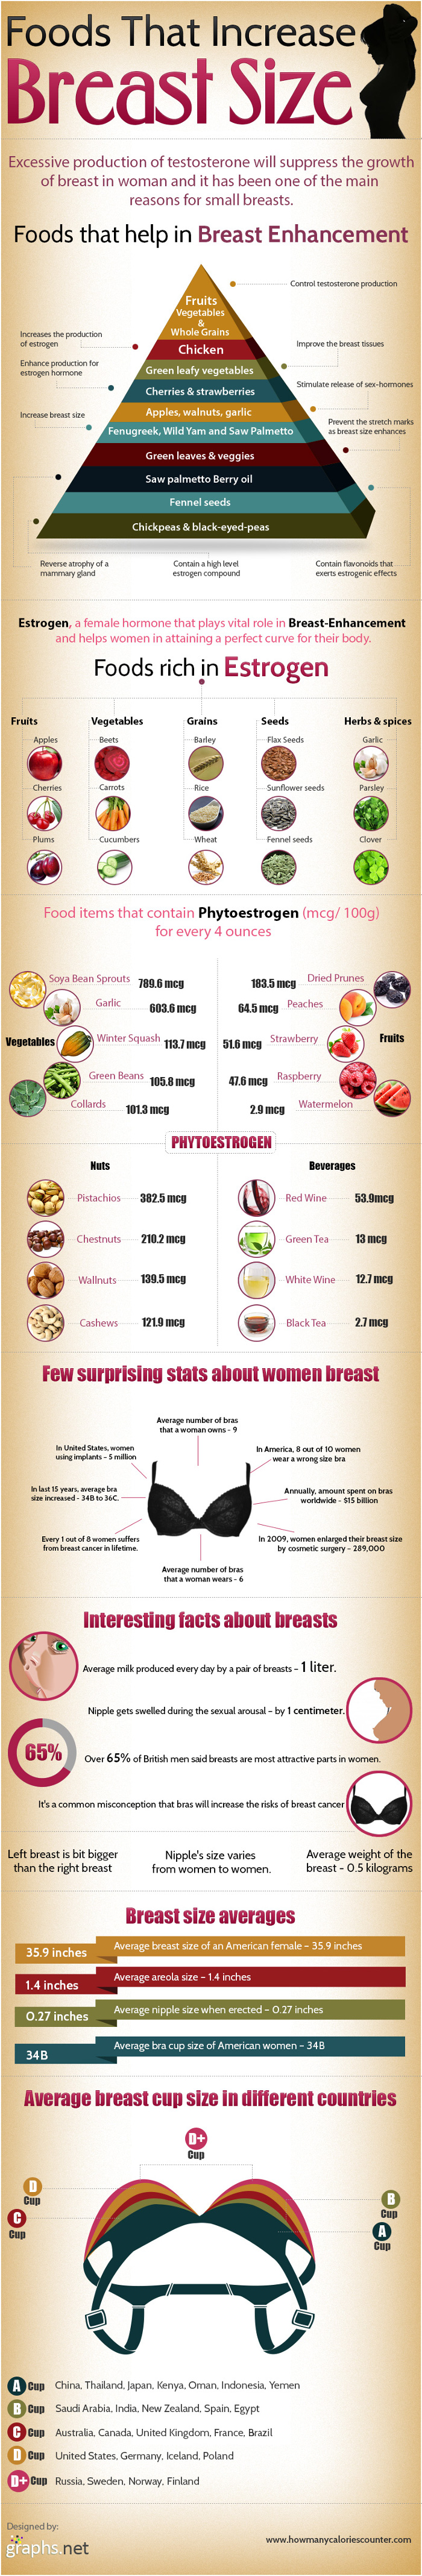 [Image: Foods-That-Increase-Breast-Size.jpg]